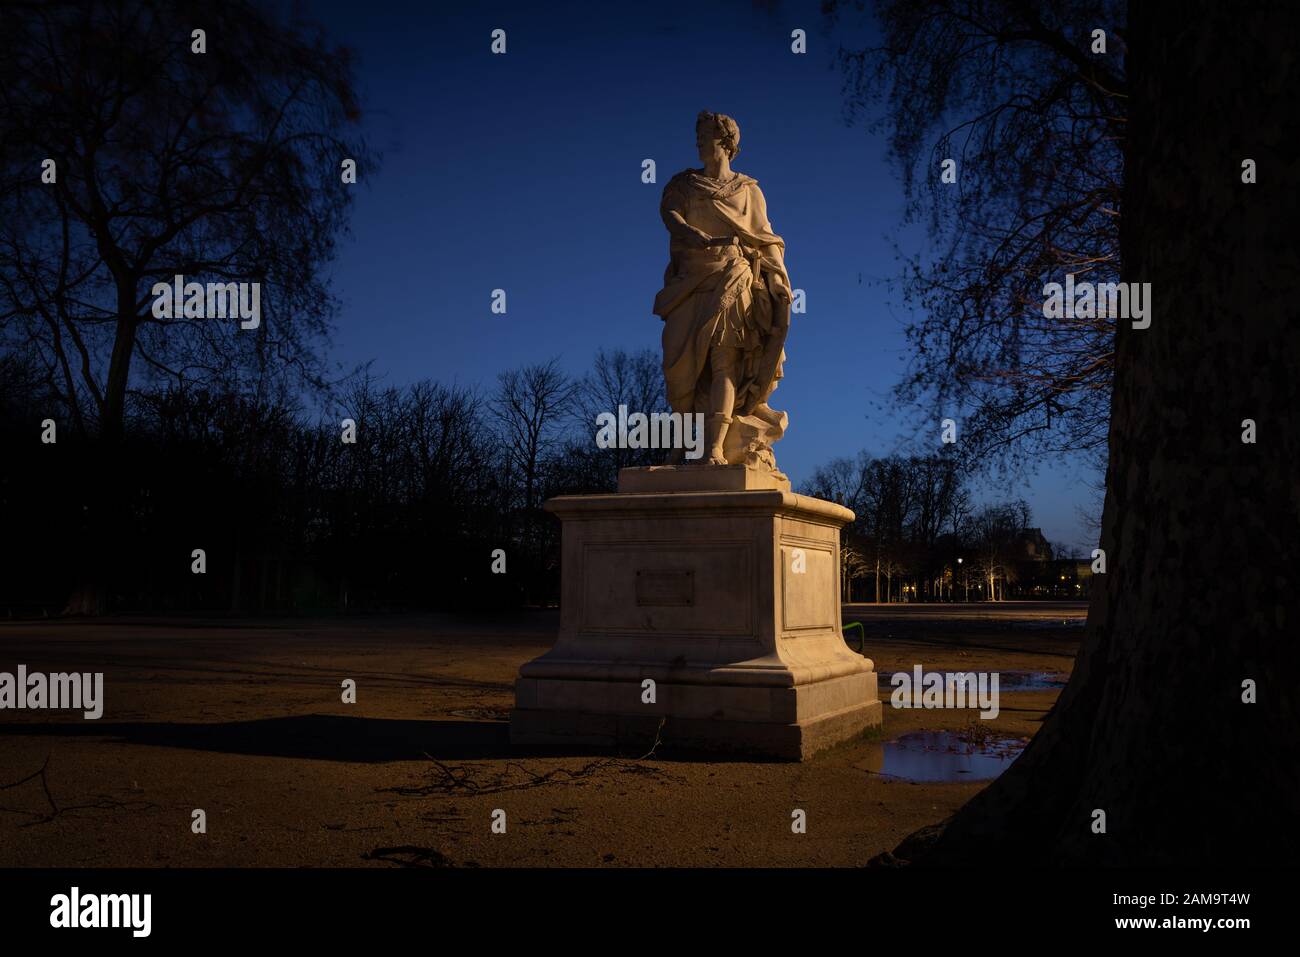 Early morning winter shot of a classical statue of a woman, Tuileries public garden, taken with long exposure, Paris, France Stock Photo